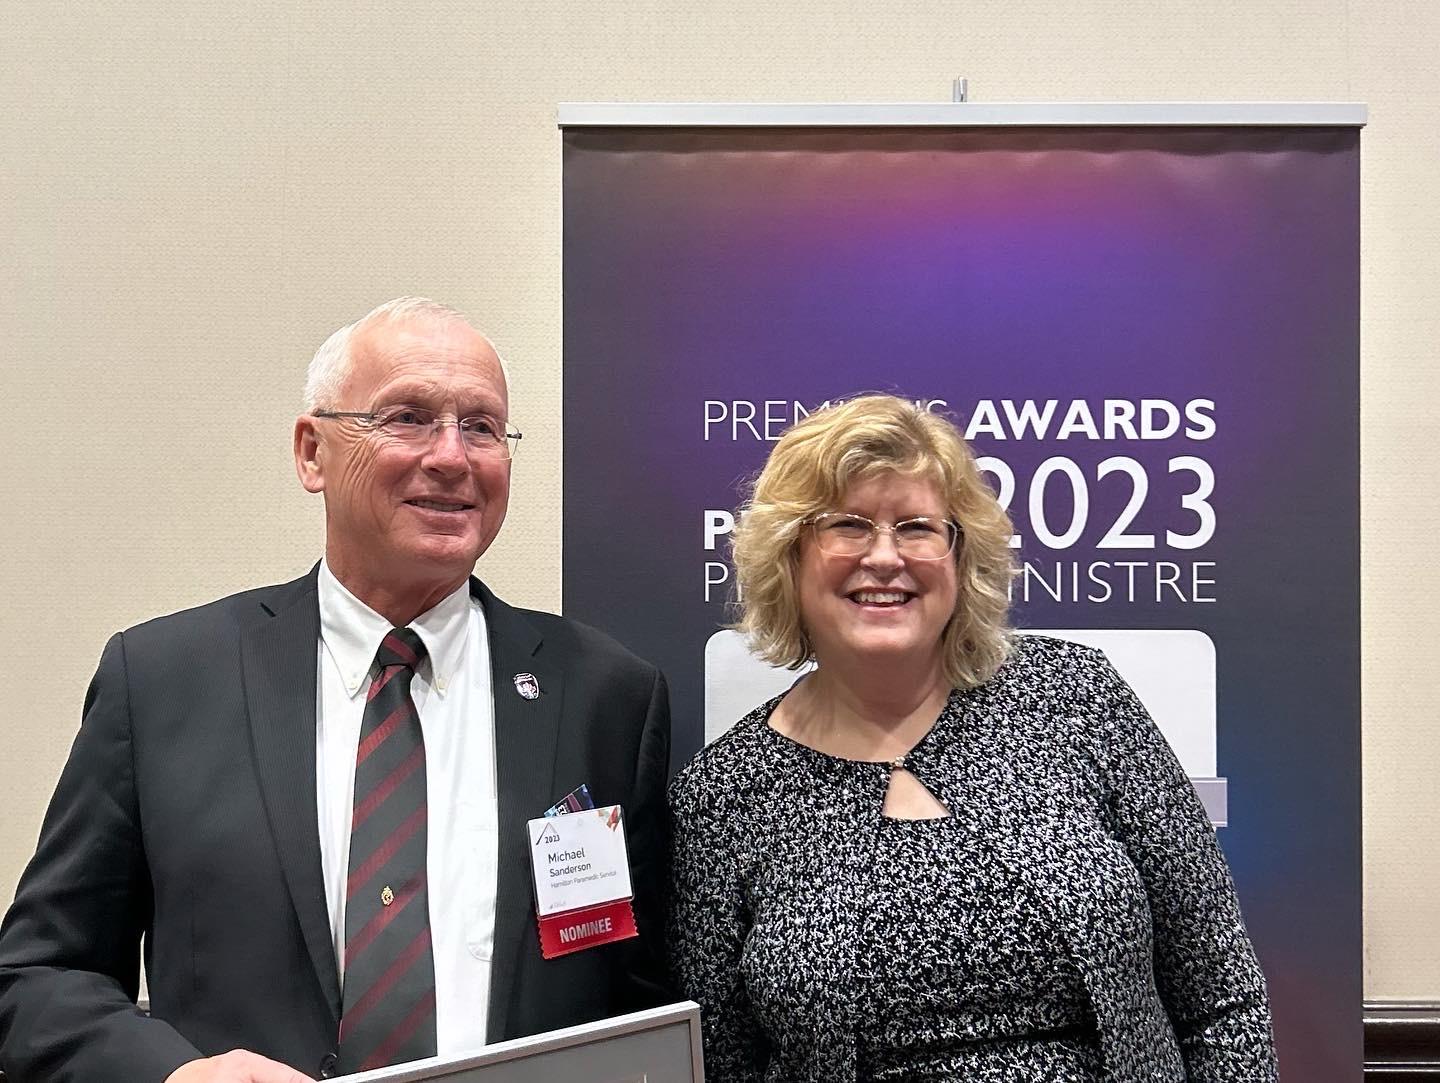 Two smiling people stand in front of a banner that reads Premier’s Awards 2023.